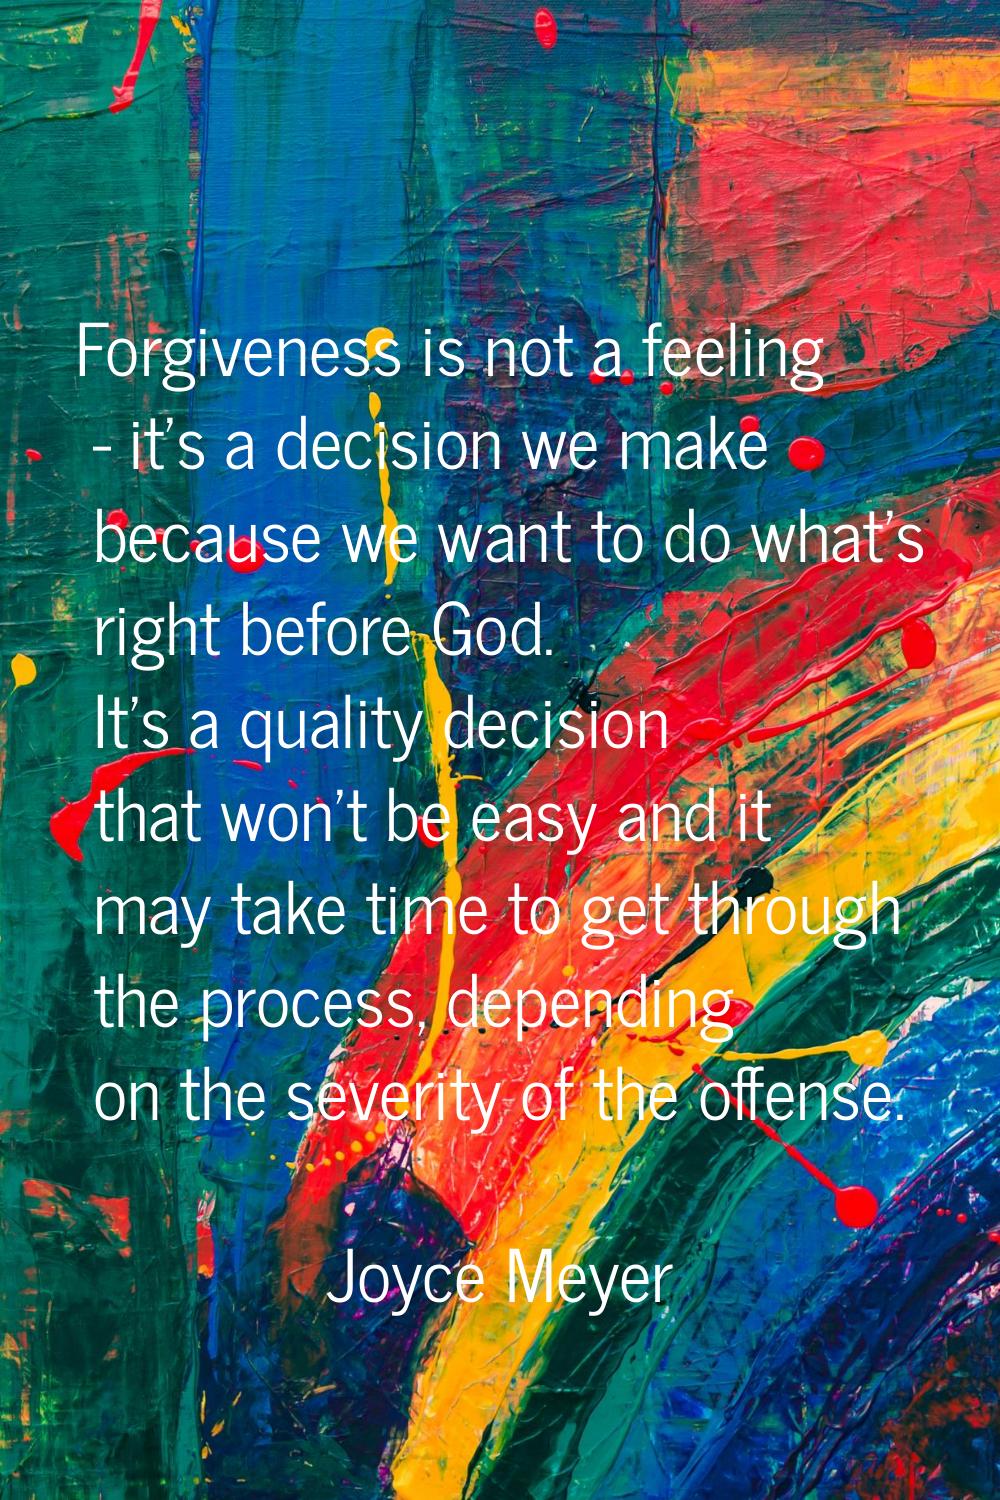 Forgiveness is not a feeling - it's a decision we make because we want to do what's right before Go